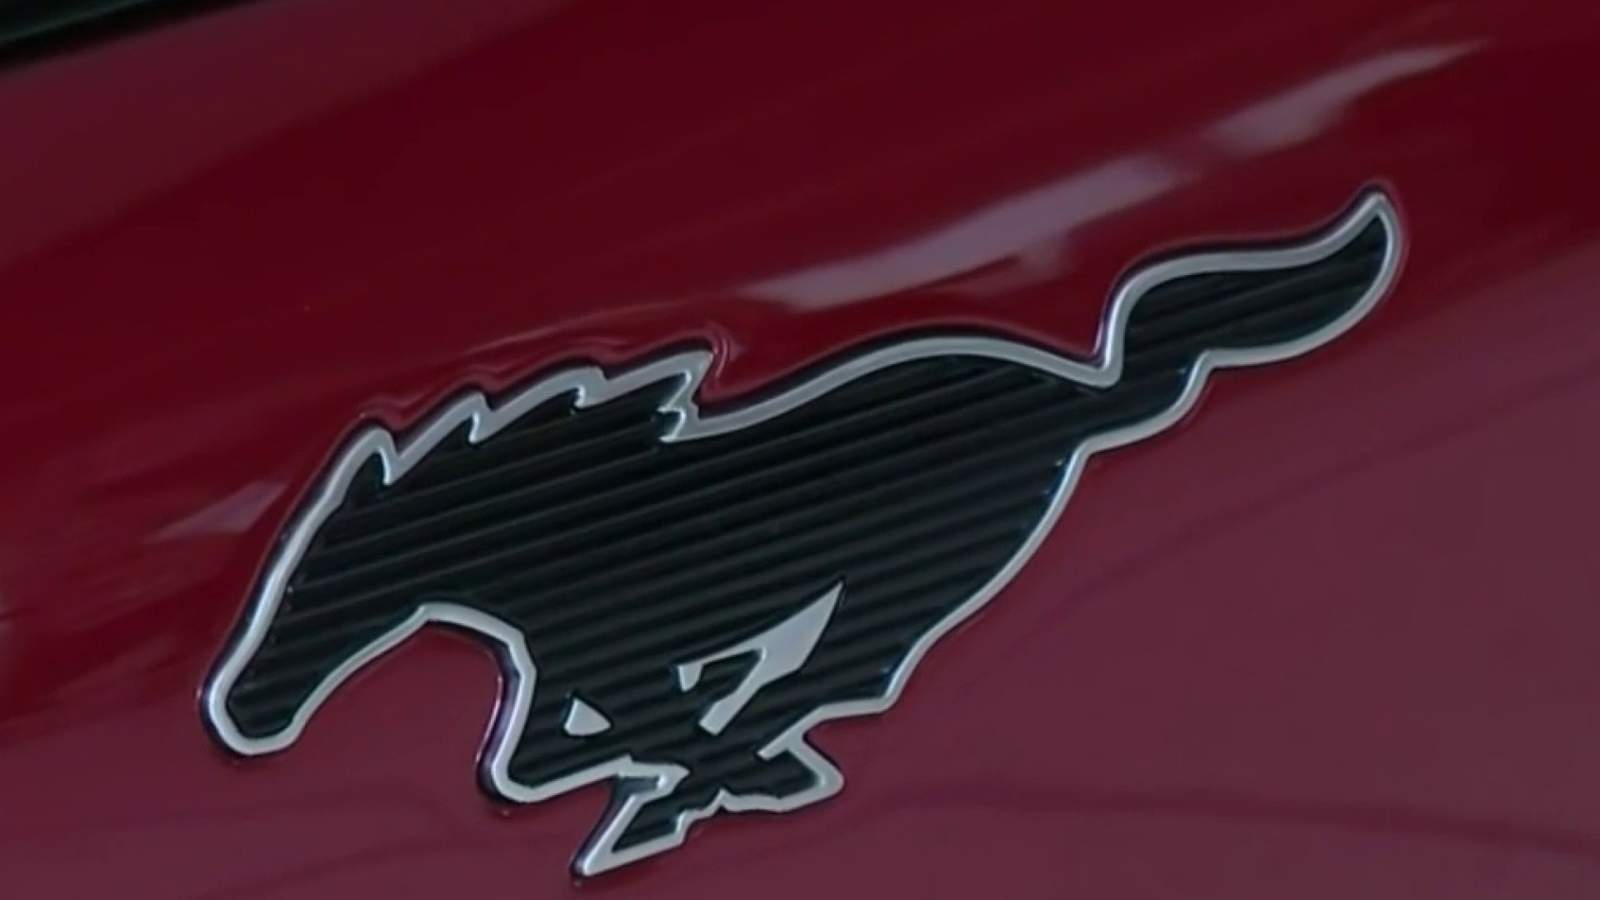 Behind the scenes of Ford's Mustang Mach-E electronic reveal